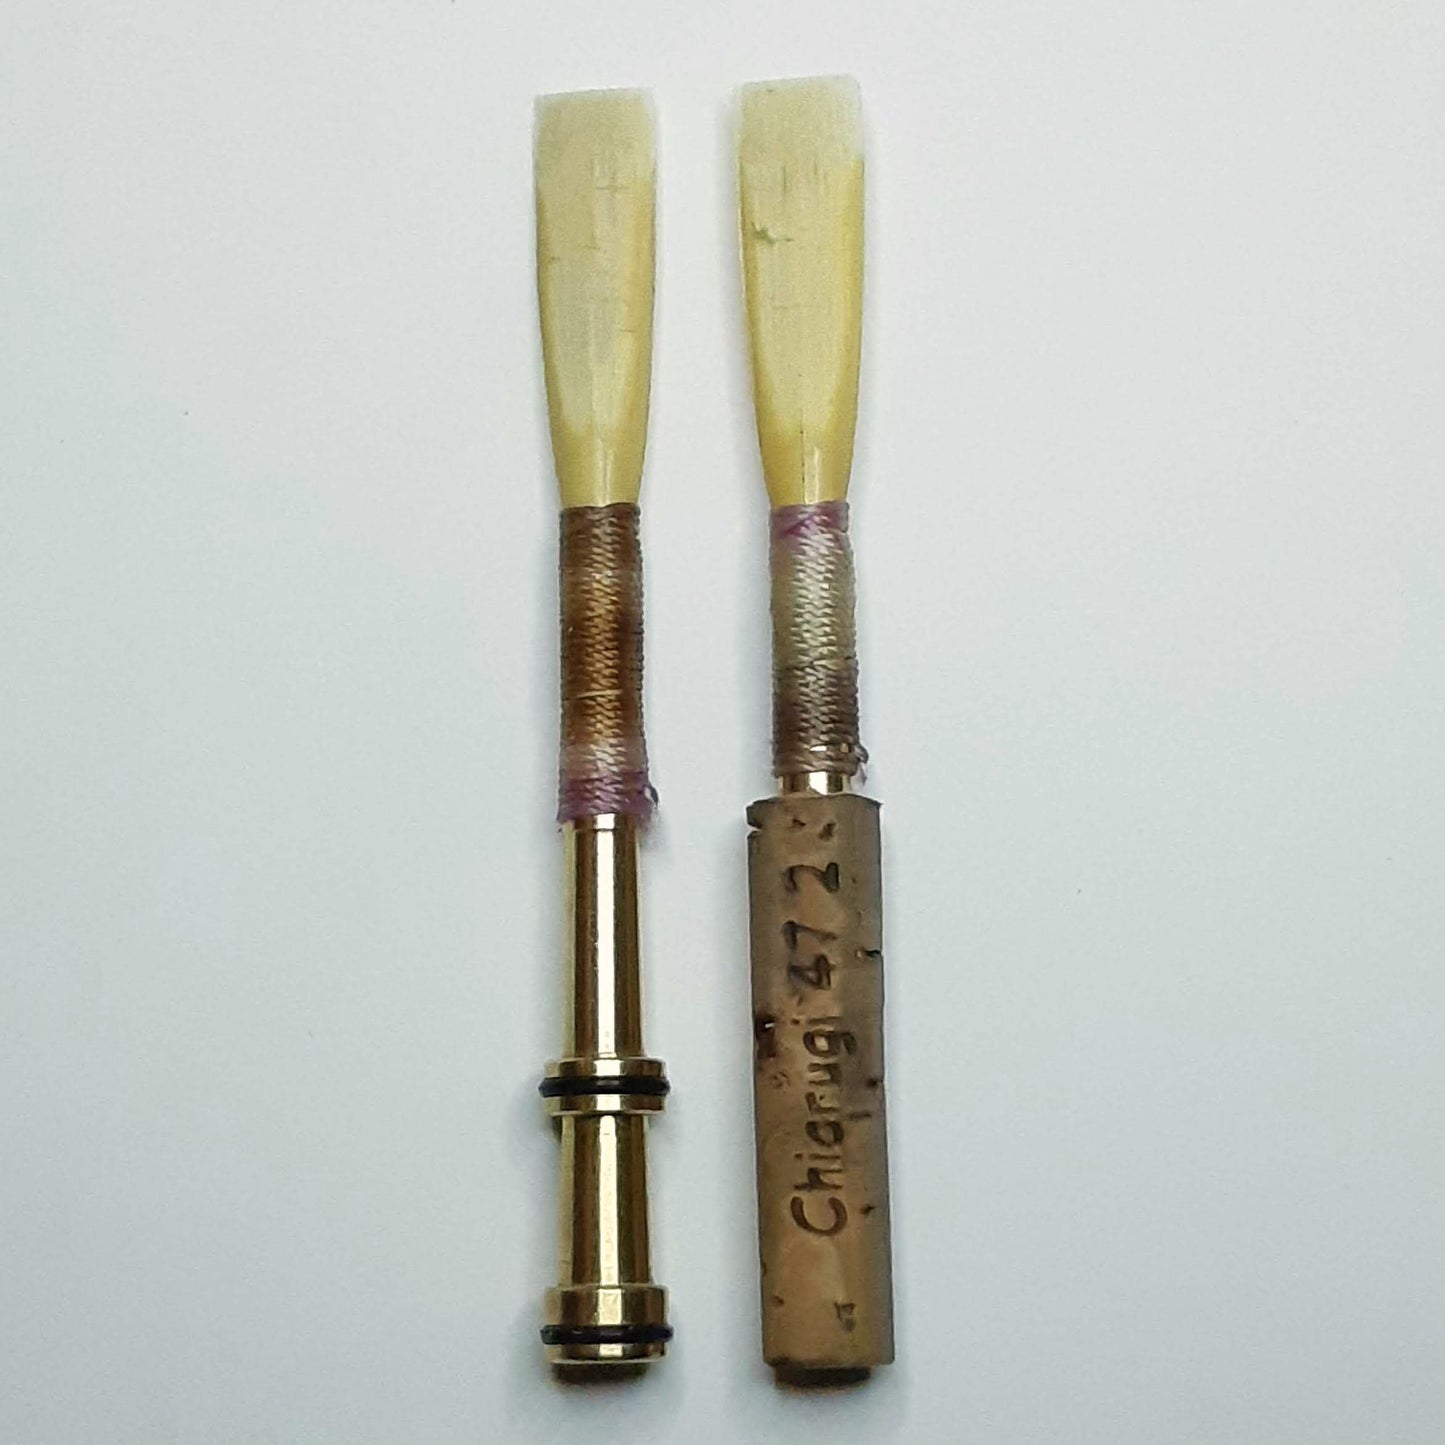 New Product: Angle Guides for Knife Sharpening. – Dan Waldron Oboe Reeds